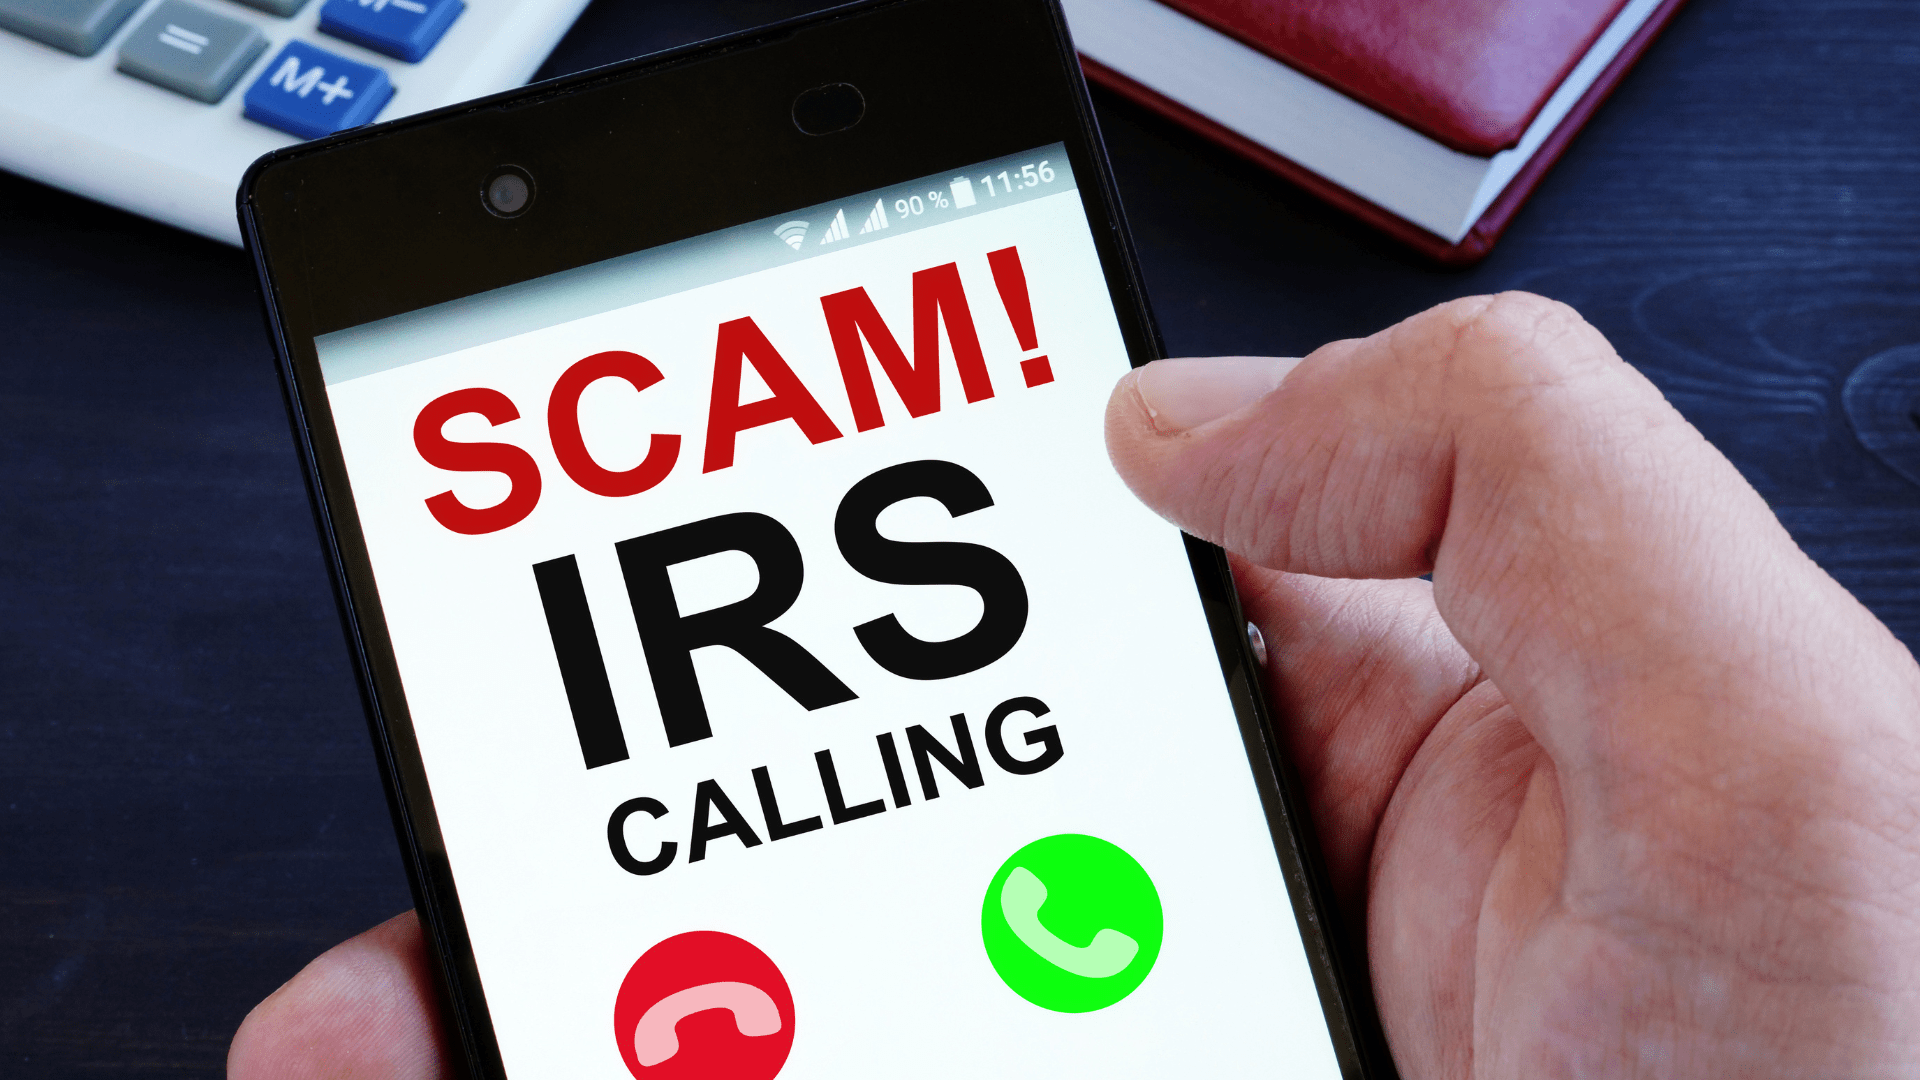 cell phone with SCAM IRS calling on front screen